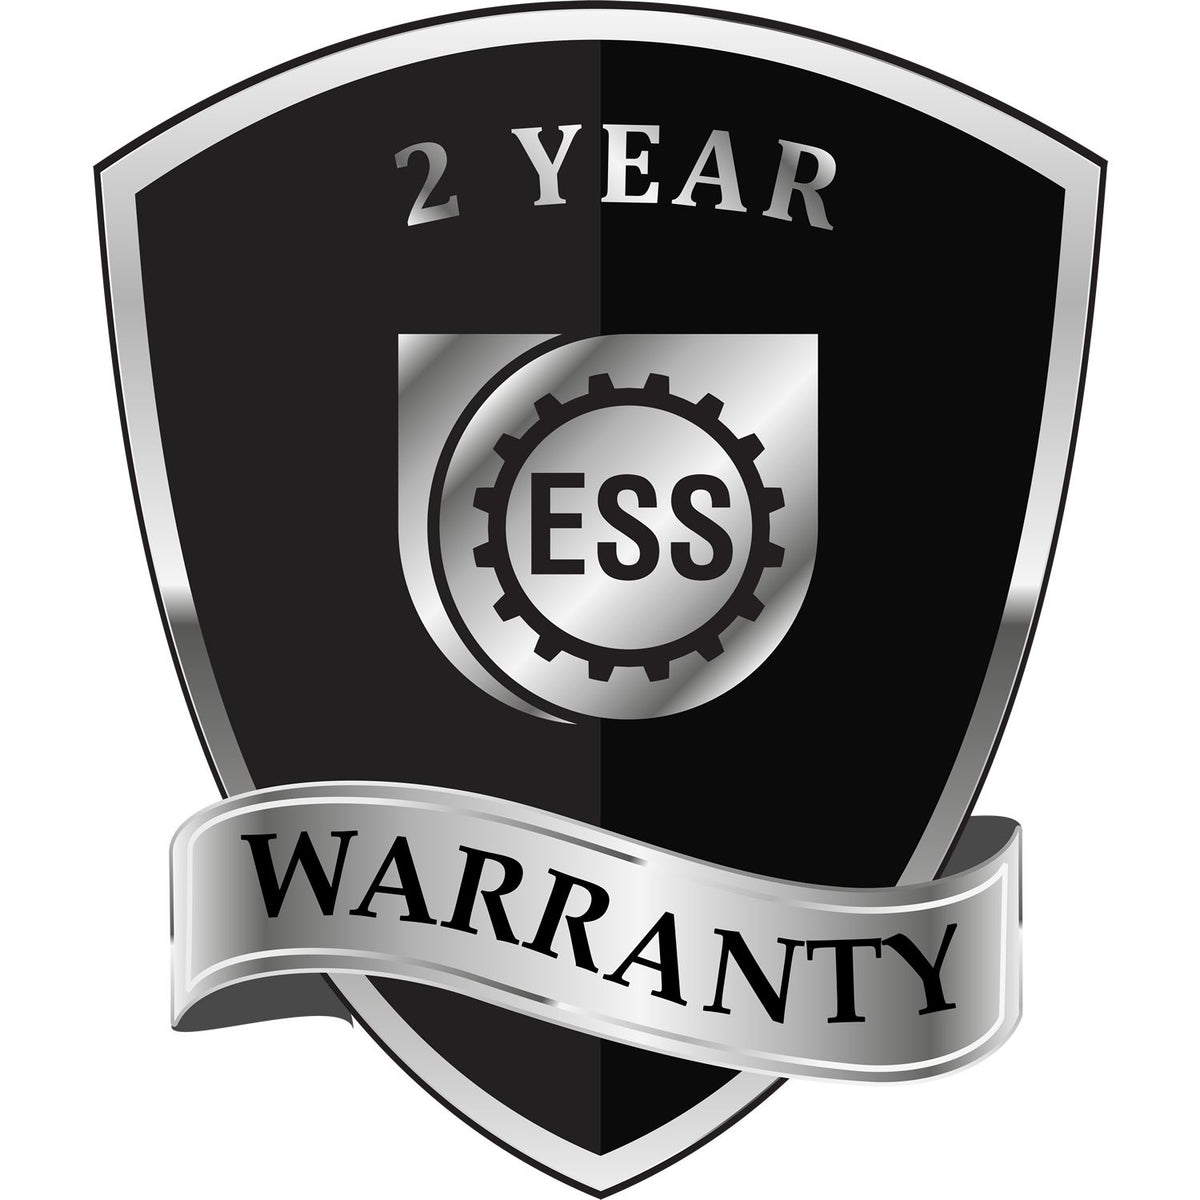 A badge or emblem showing a warranty icon for the Extended Long Reach South Dakota Architect Seal Embosser